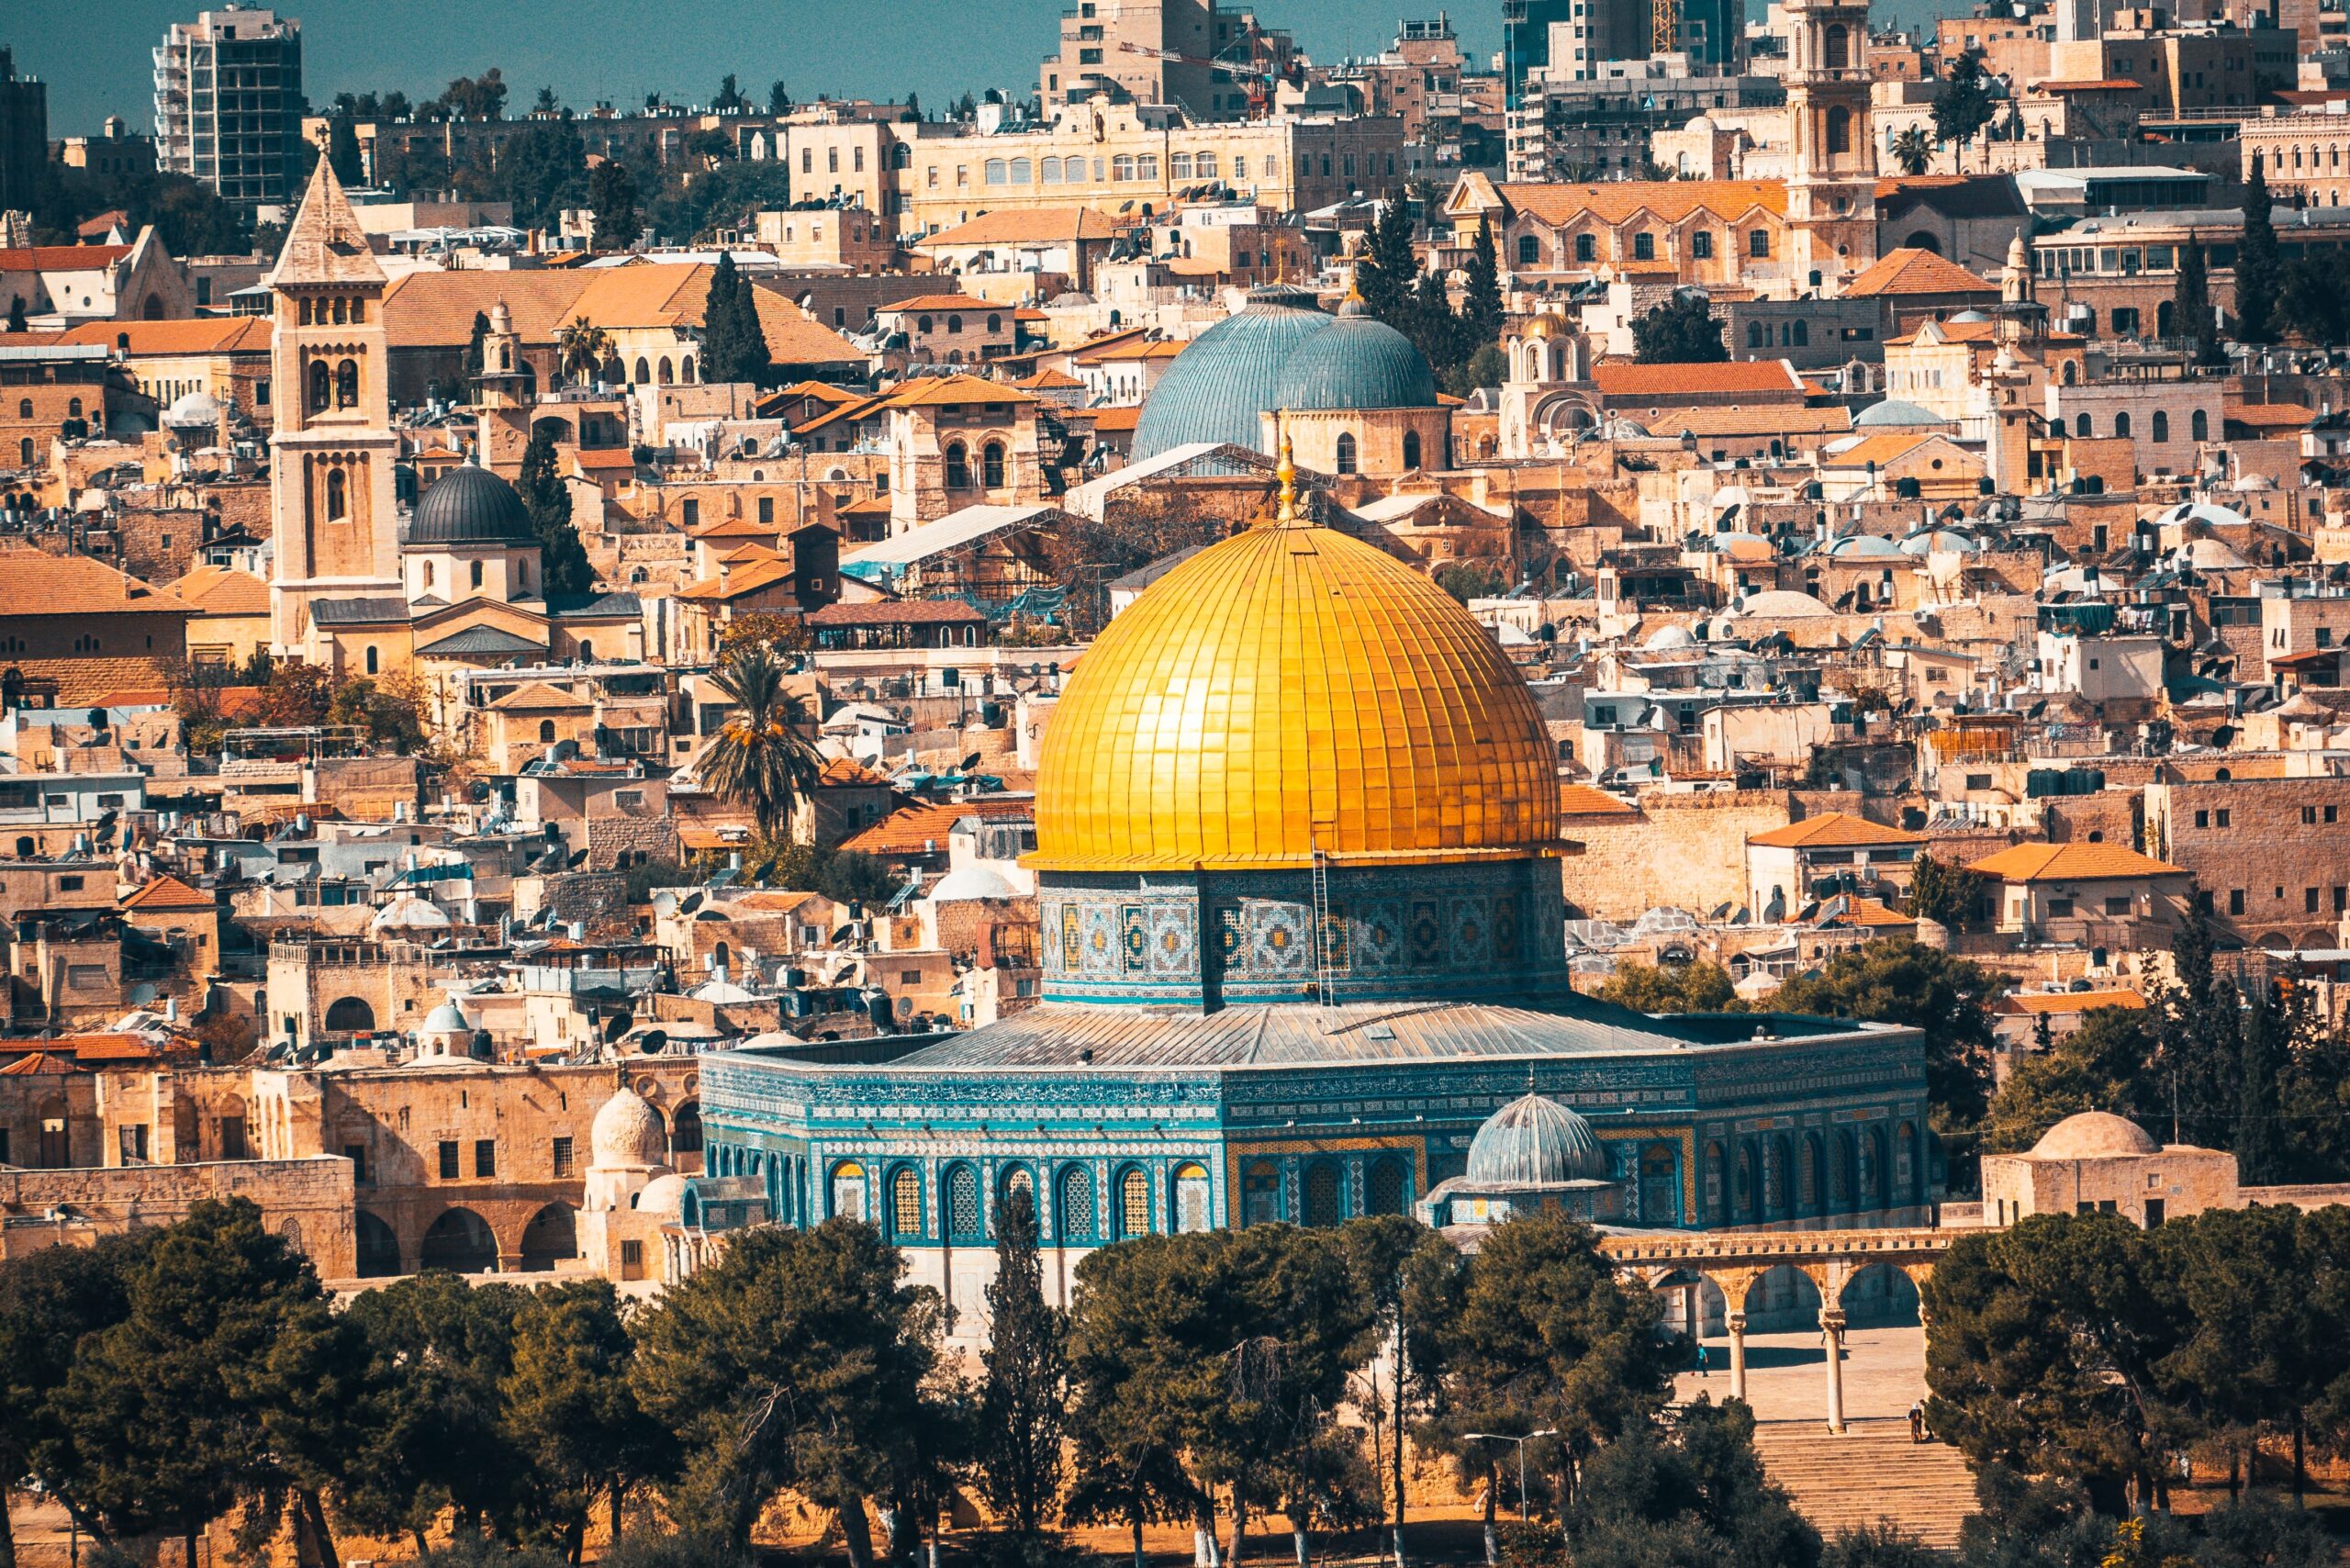 The Temple Mount - the golden Dome of the Rock mosque in the old city of Jerusalem, Israel